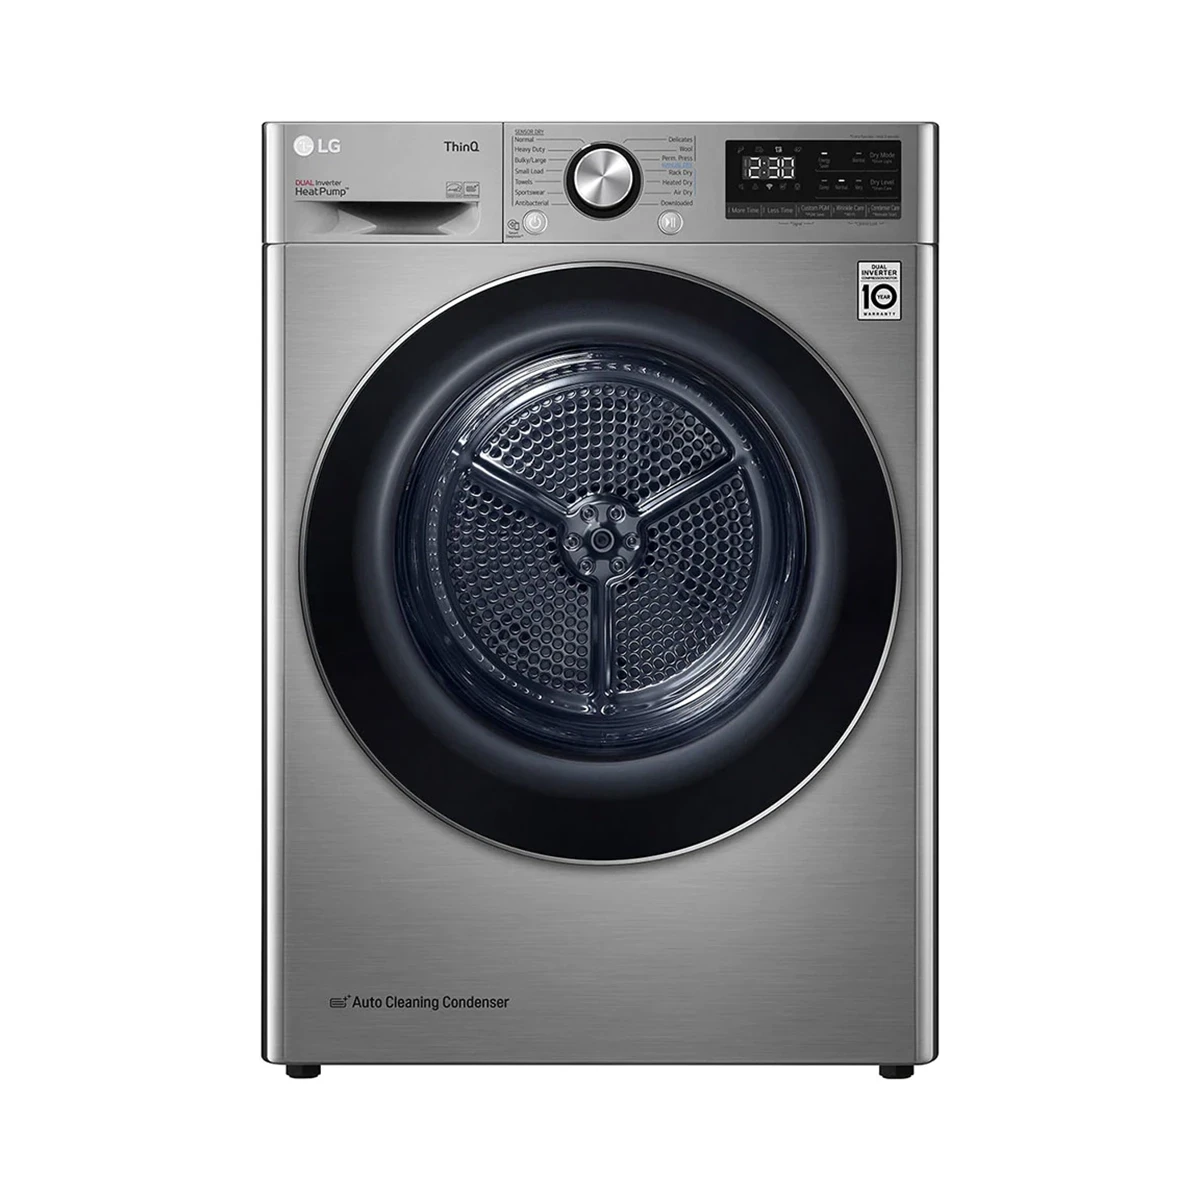 LG Washing Machine 10 Dryer With Condenser And Remote Control